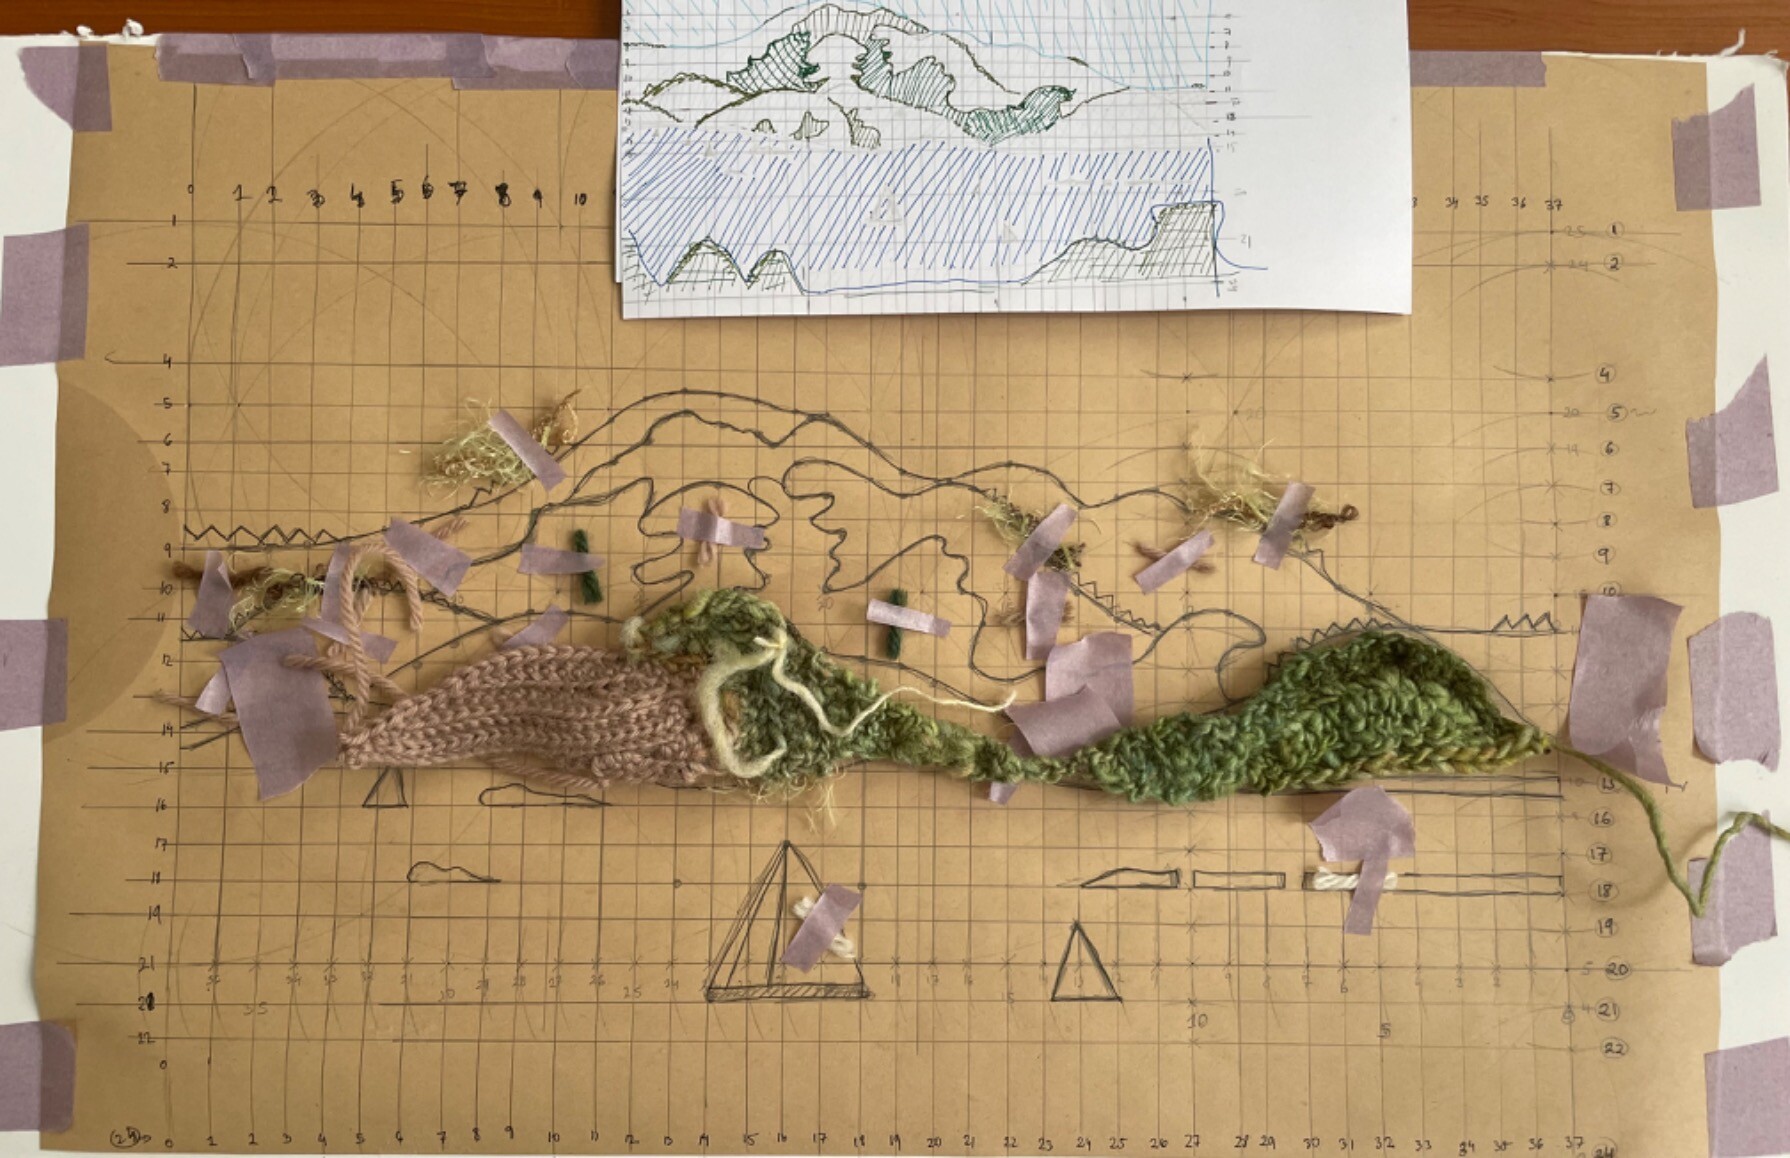 Butcher’s paper with a grid drawn on it, and a diagram of an island. Bits of yarn are taped to portions. A little bit of the bottom part of the island is filled in with messy crochet.